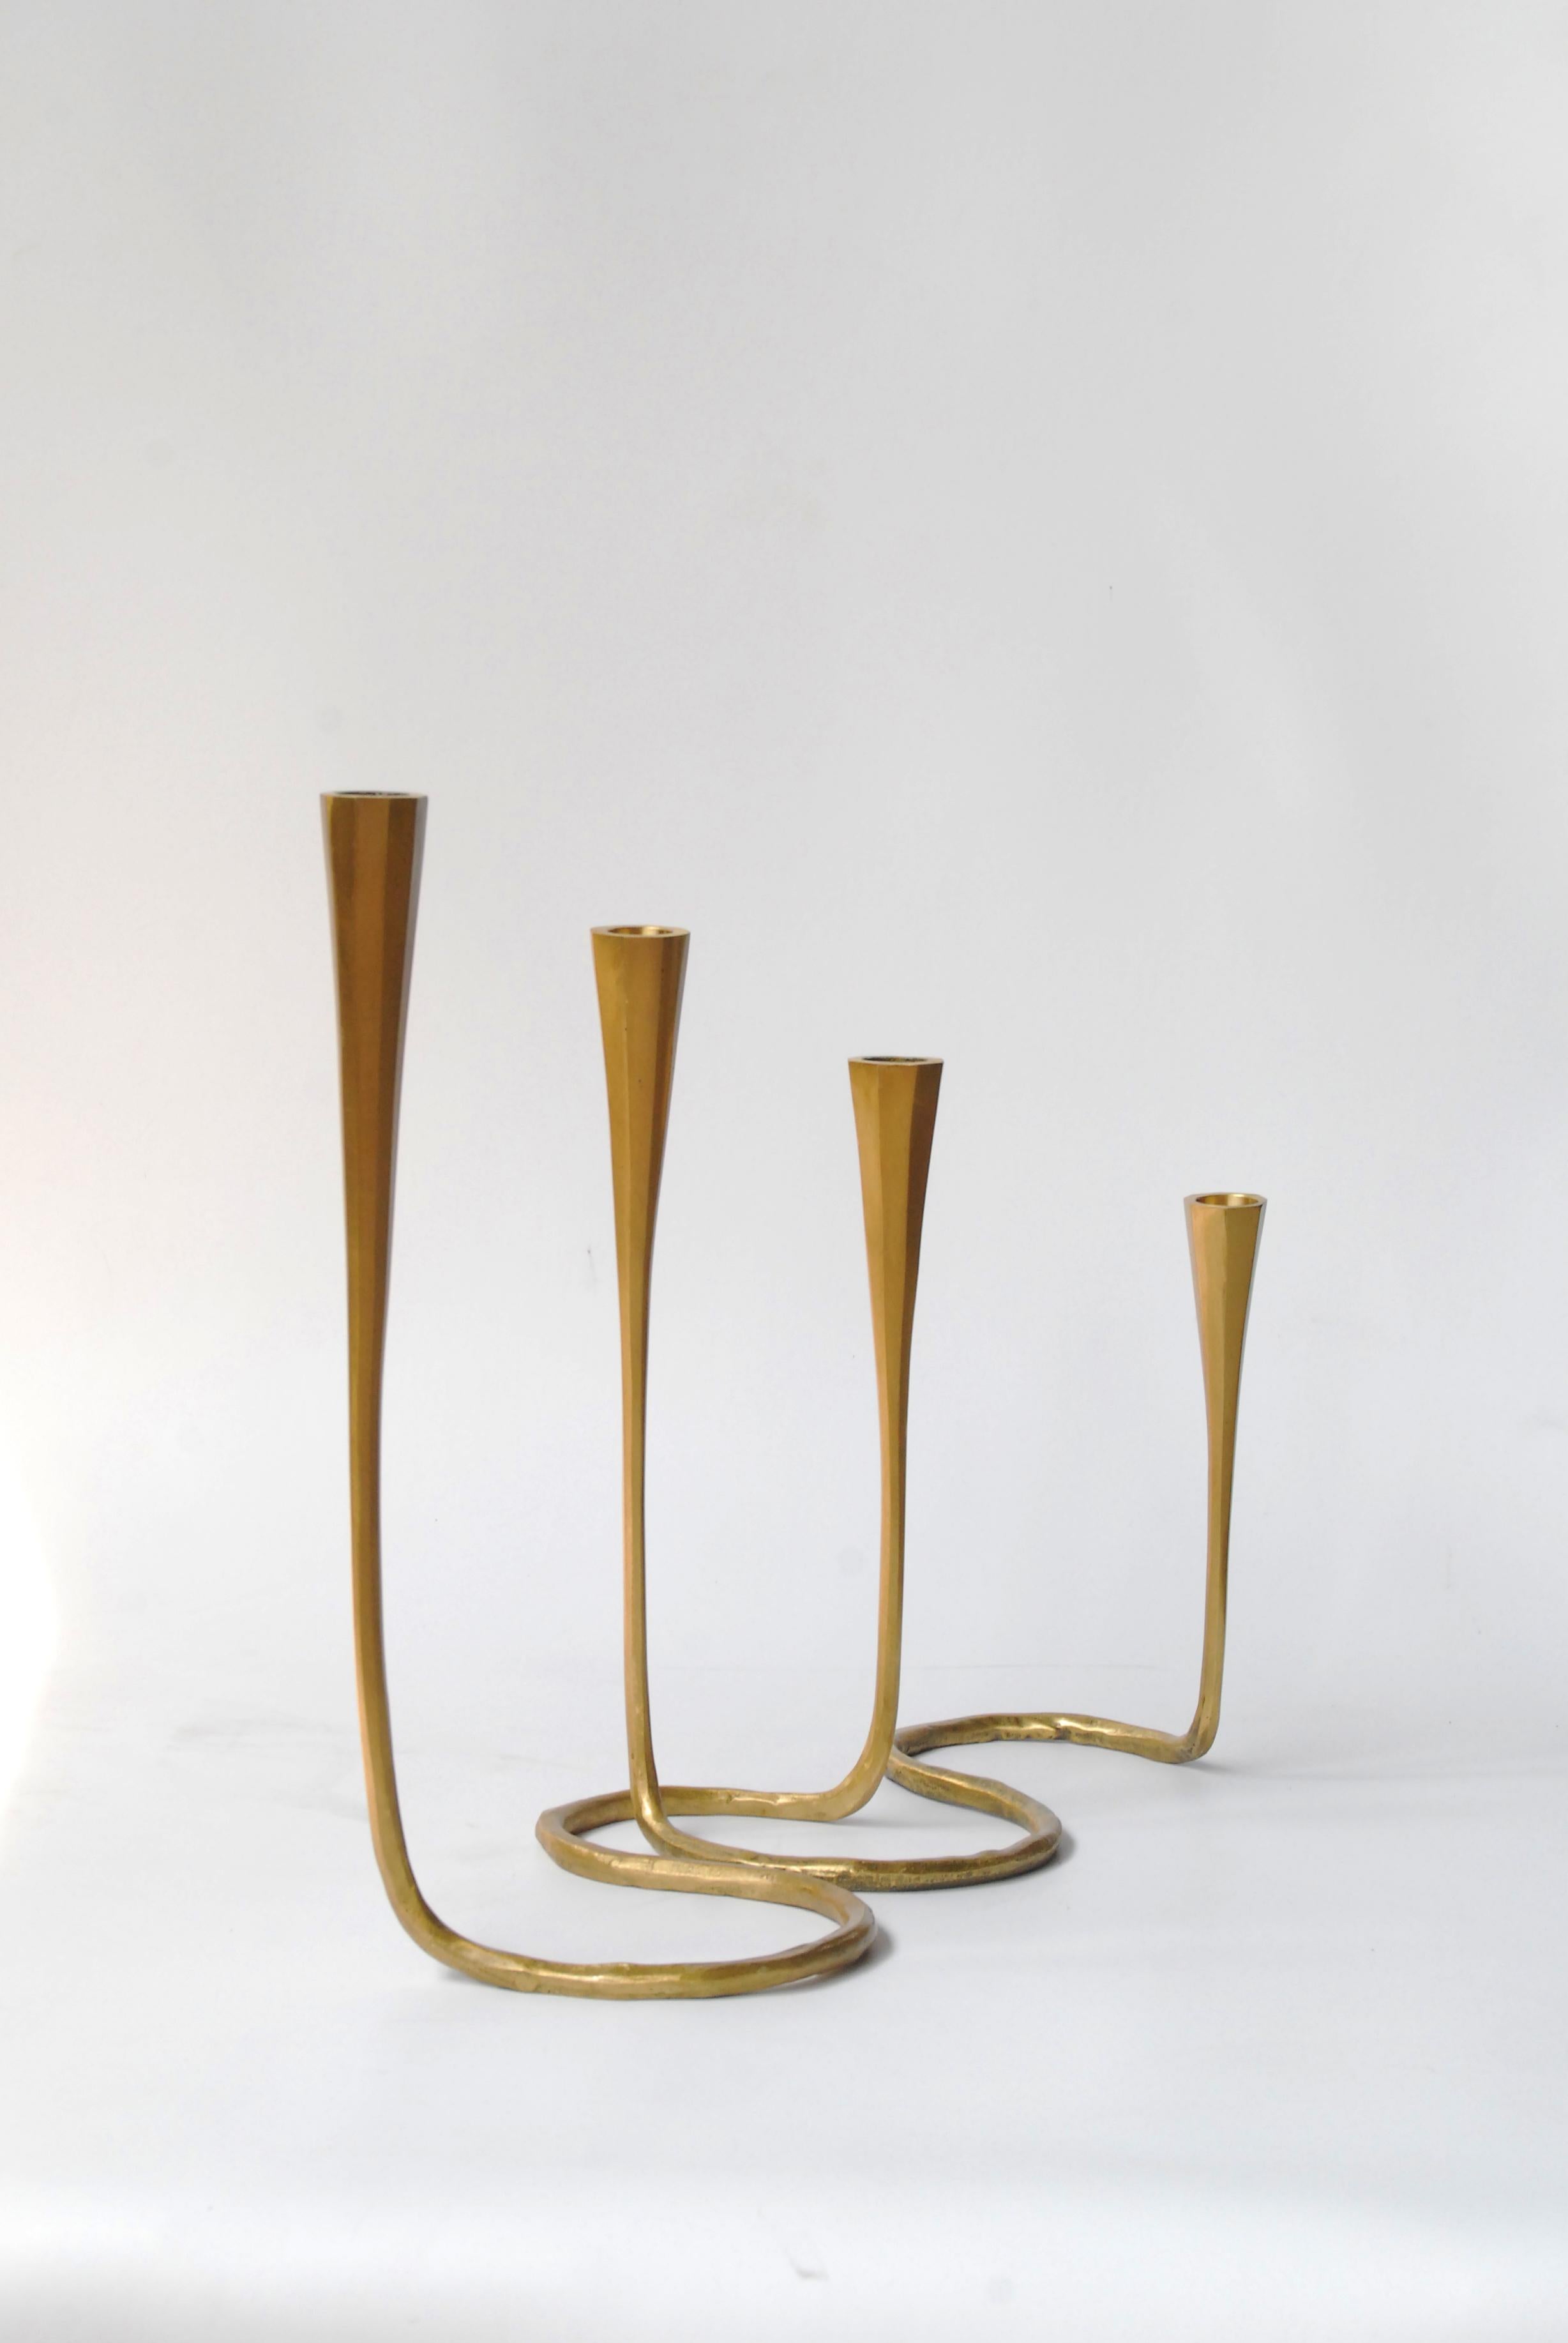 Cast Bronze Daisy Candlestands in Matte Gold Bronze Finish Large by Elan Atelier 2